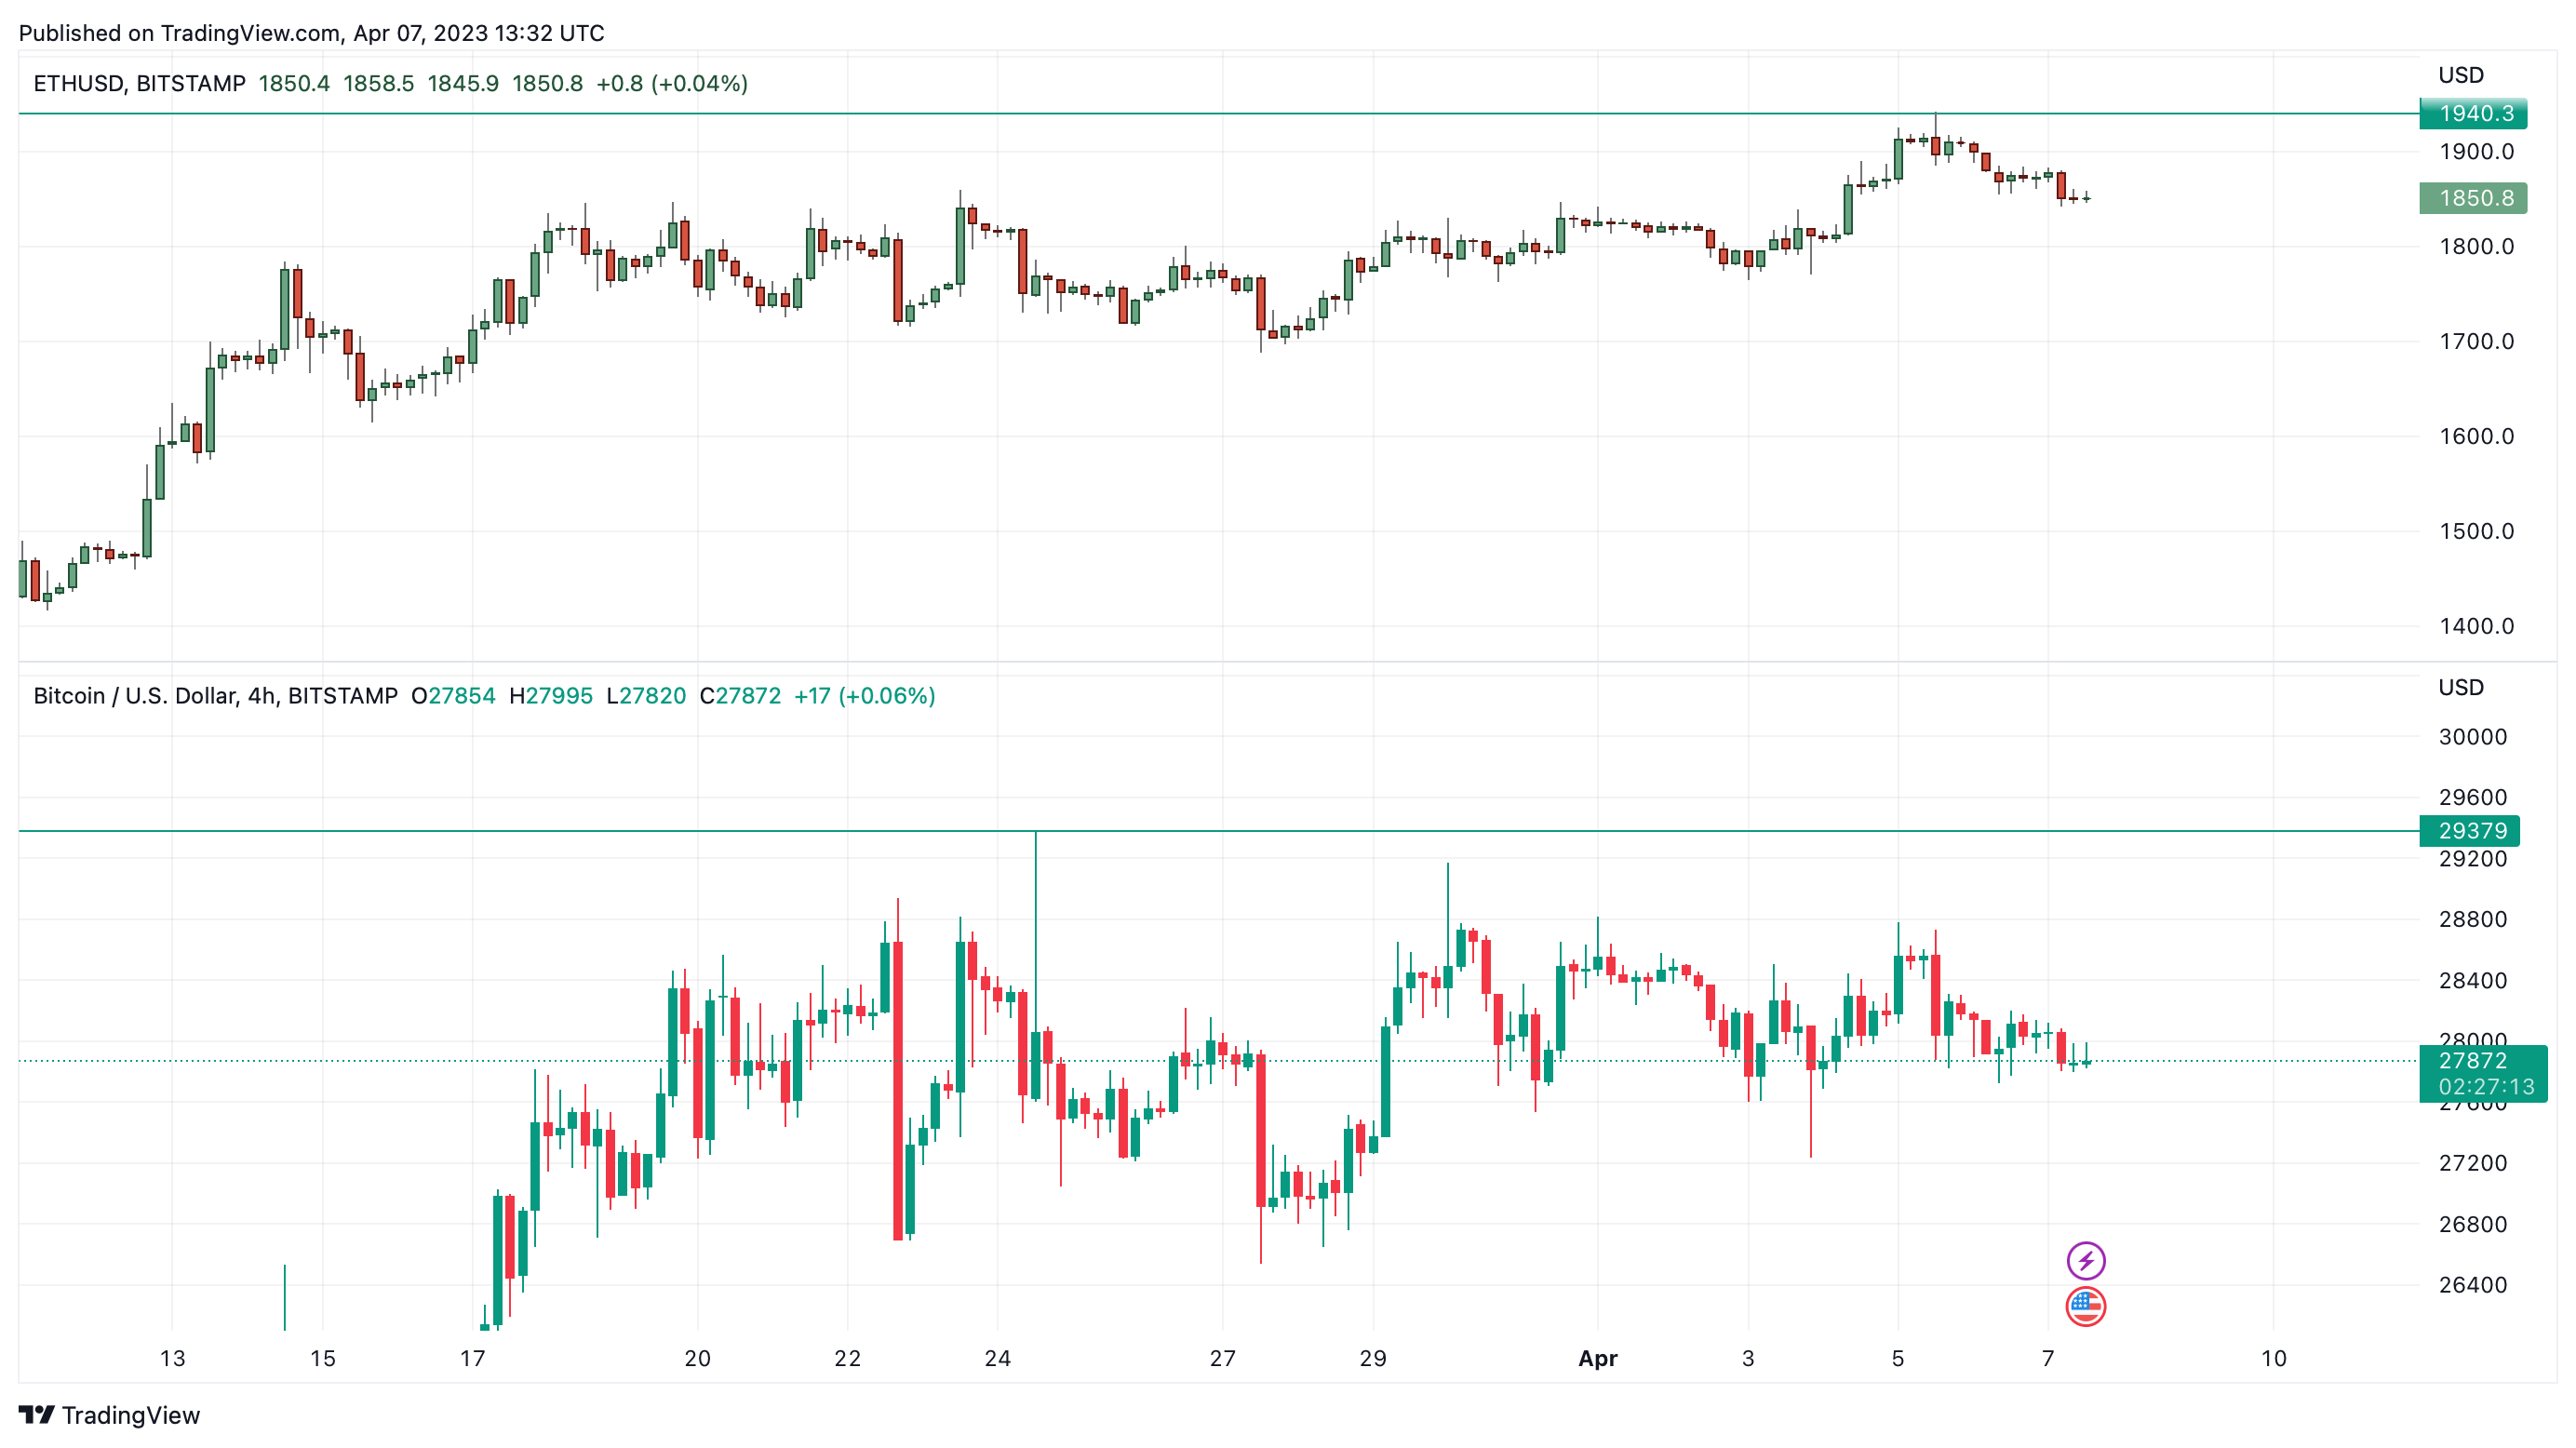 ETH/USD and BTC/USD 4-hour price charts